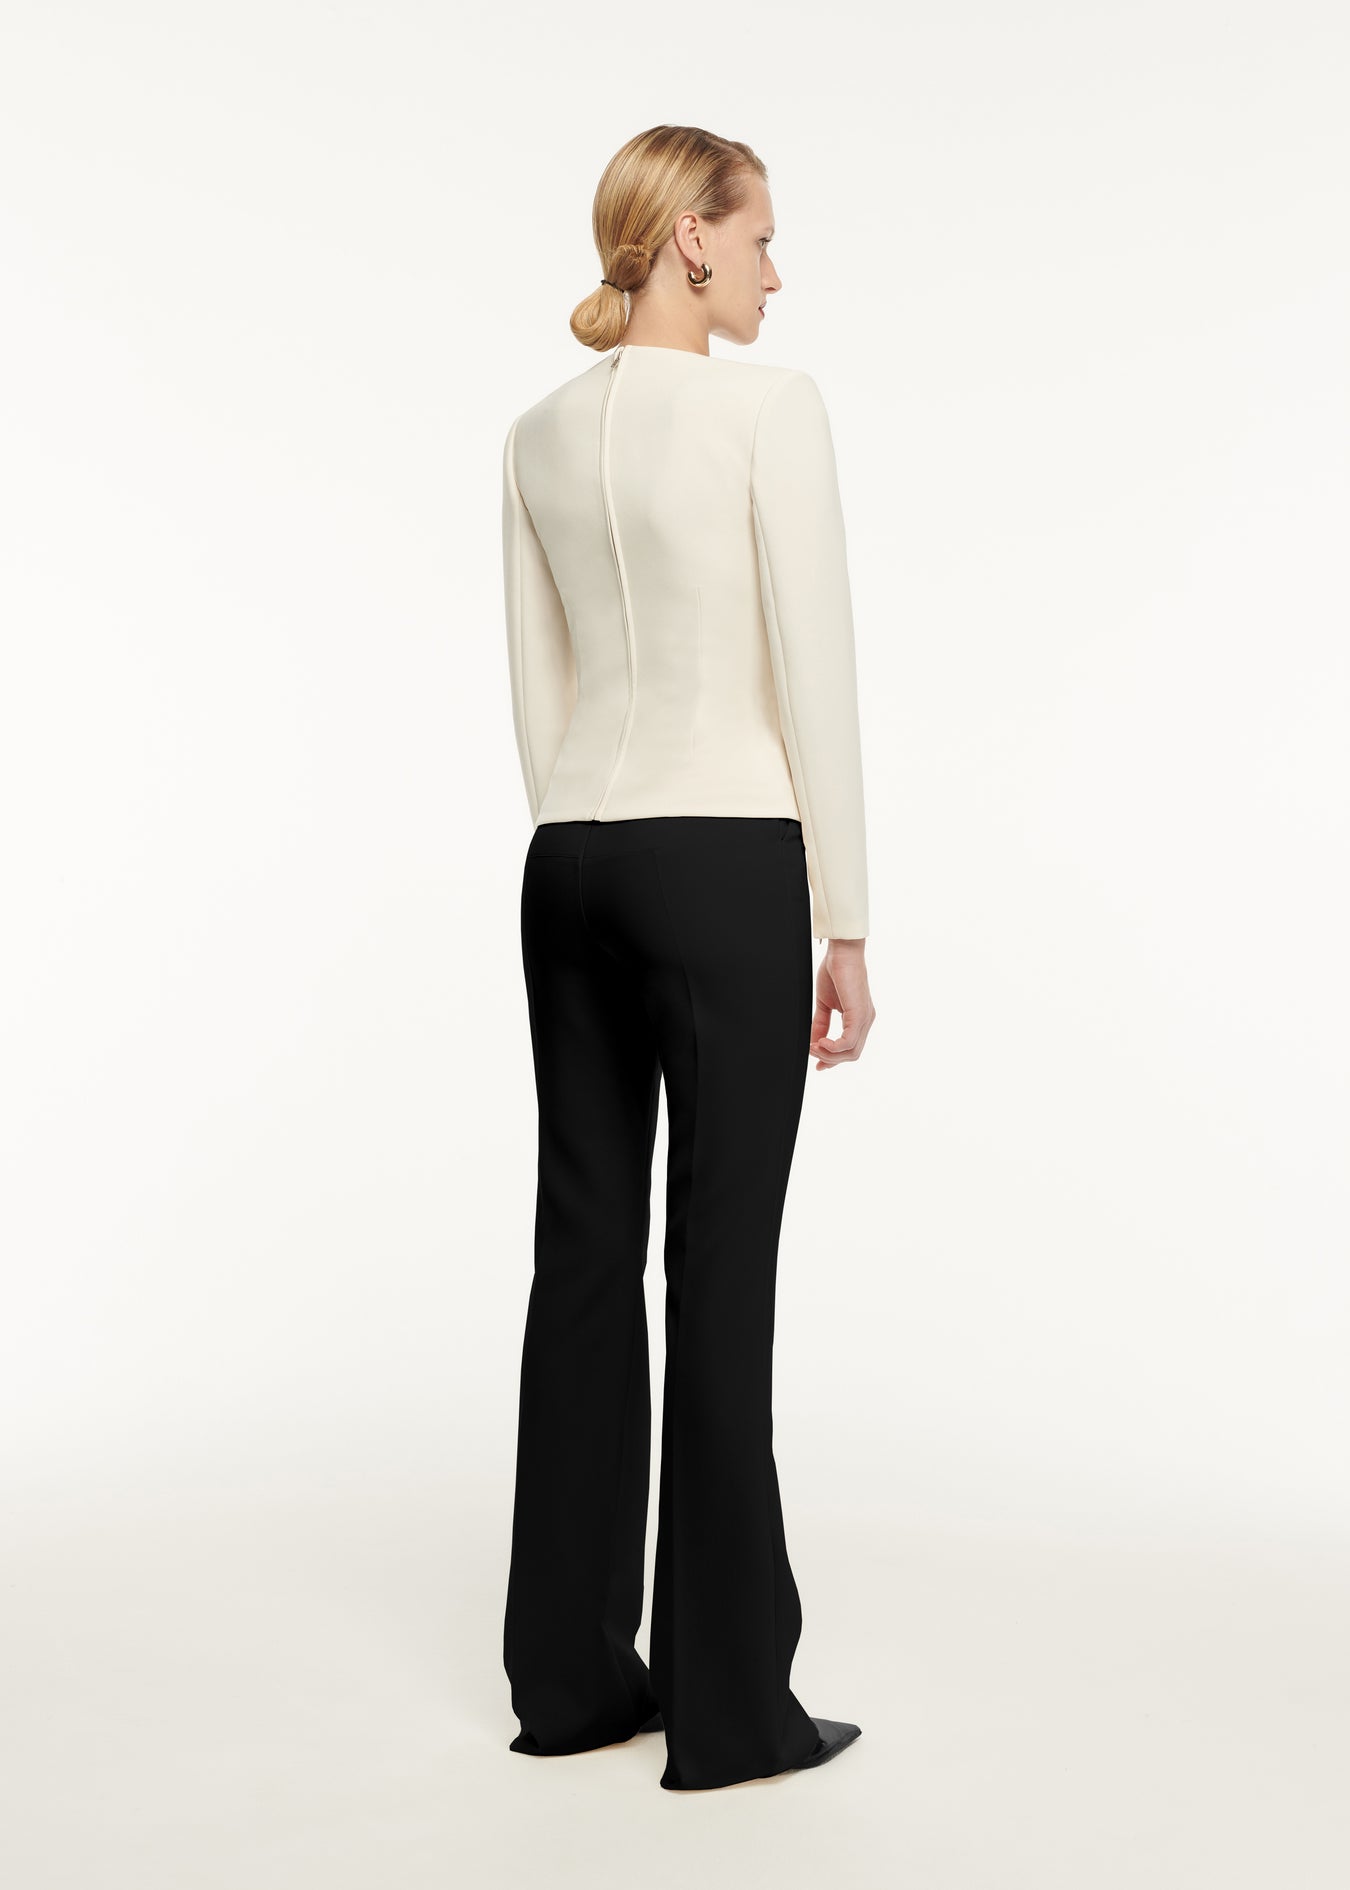 The back of a woman wearing the Long Sleeve Drape Detail Crepe Top